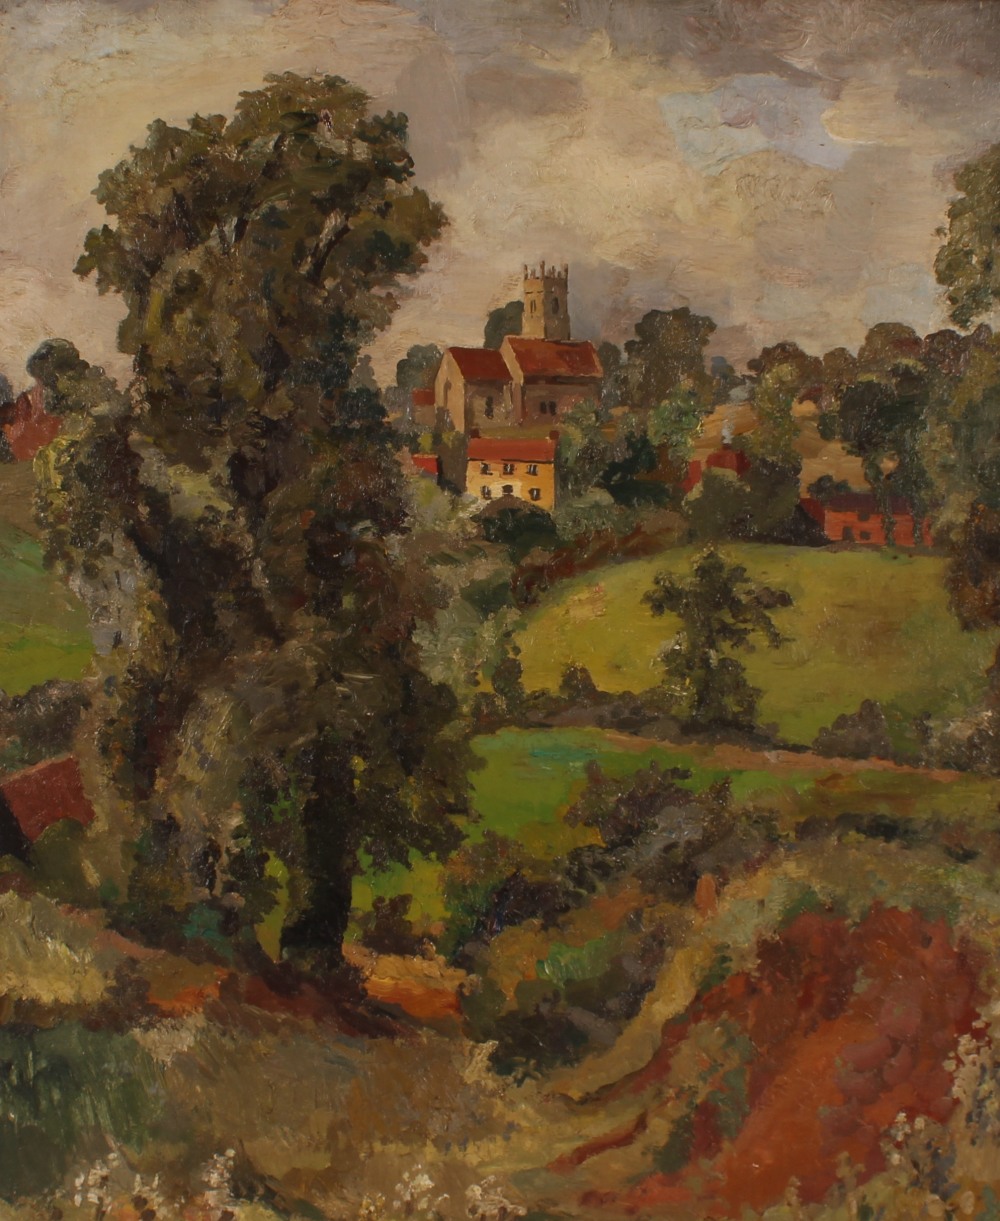 Attributed to Allan Walton, study of a rural village in rolling landscape, unsigned oil on canvas,